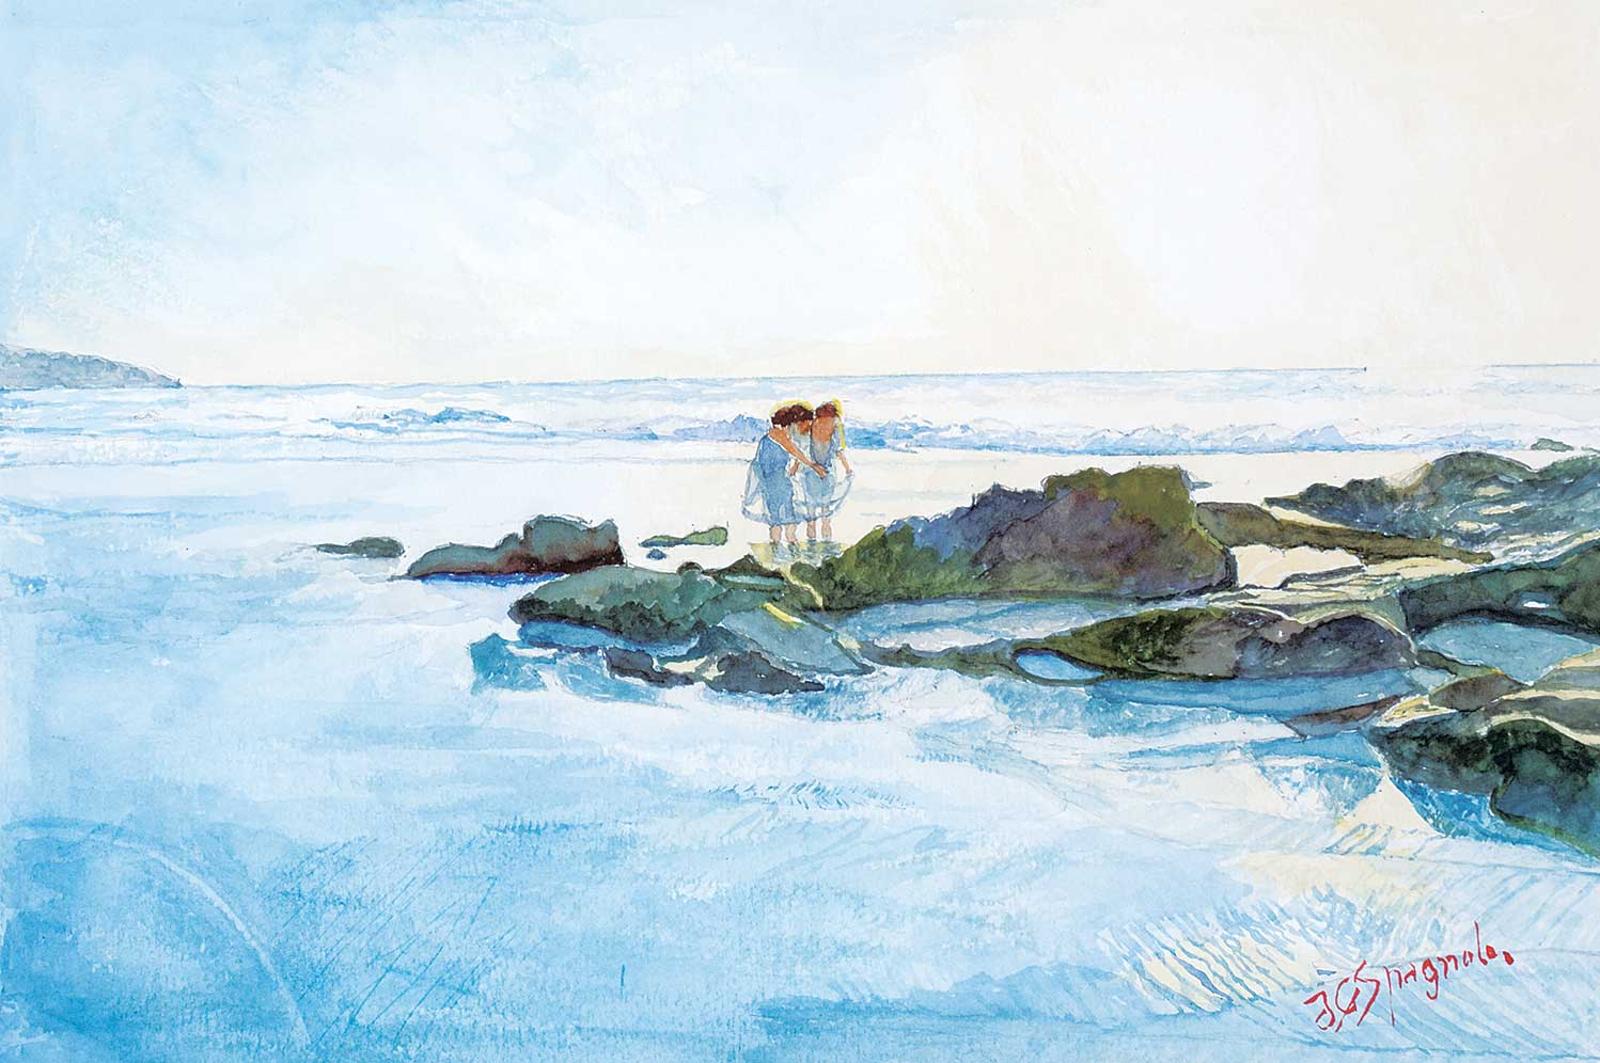 Spagnola - Untitled - Girls in the Tide Pools